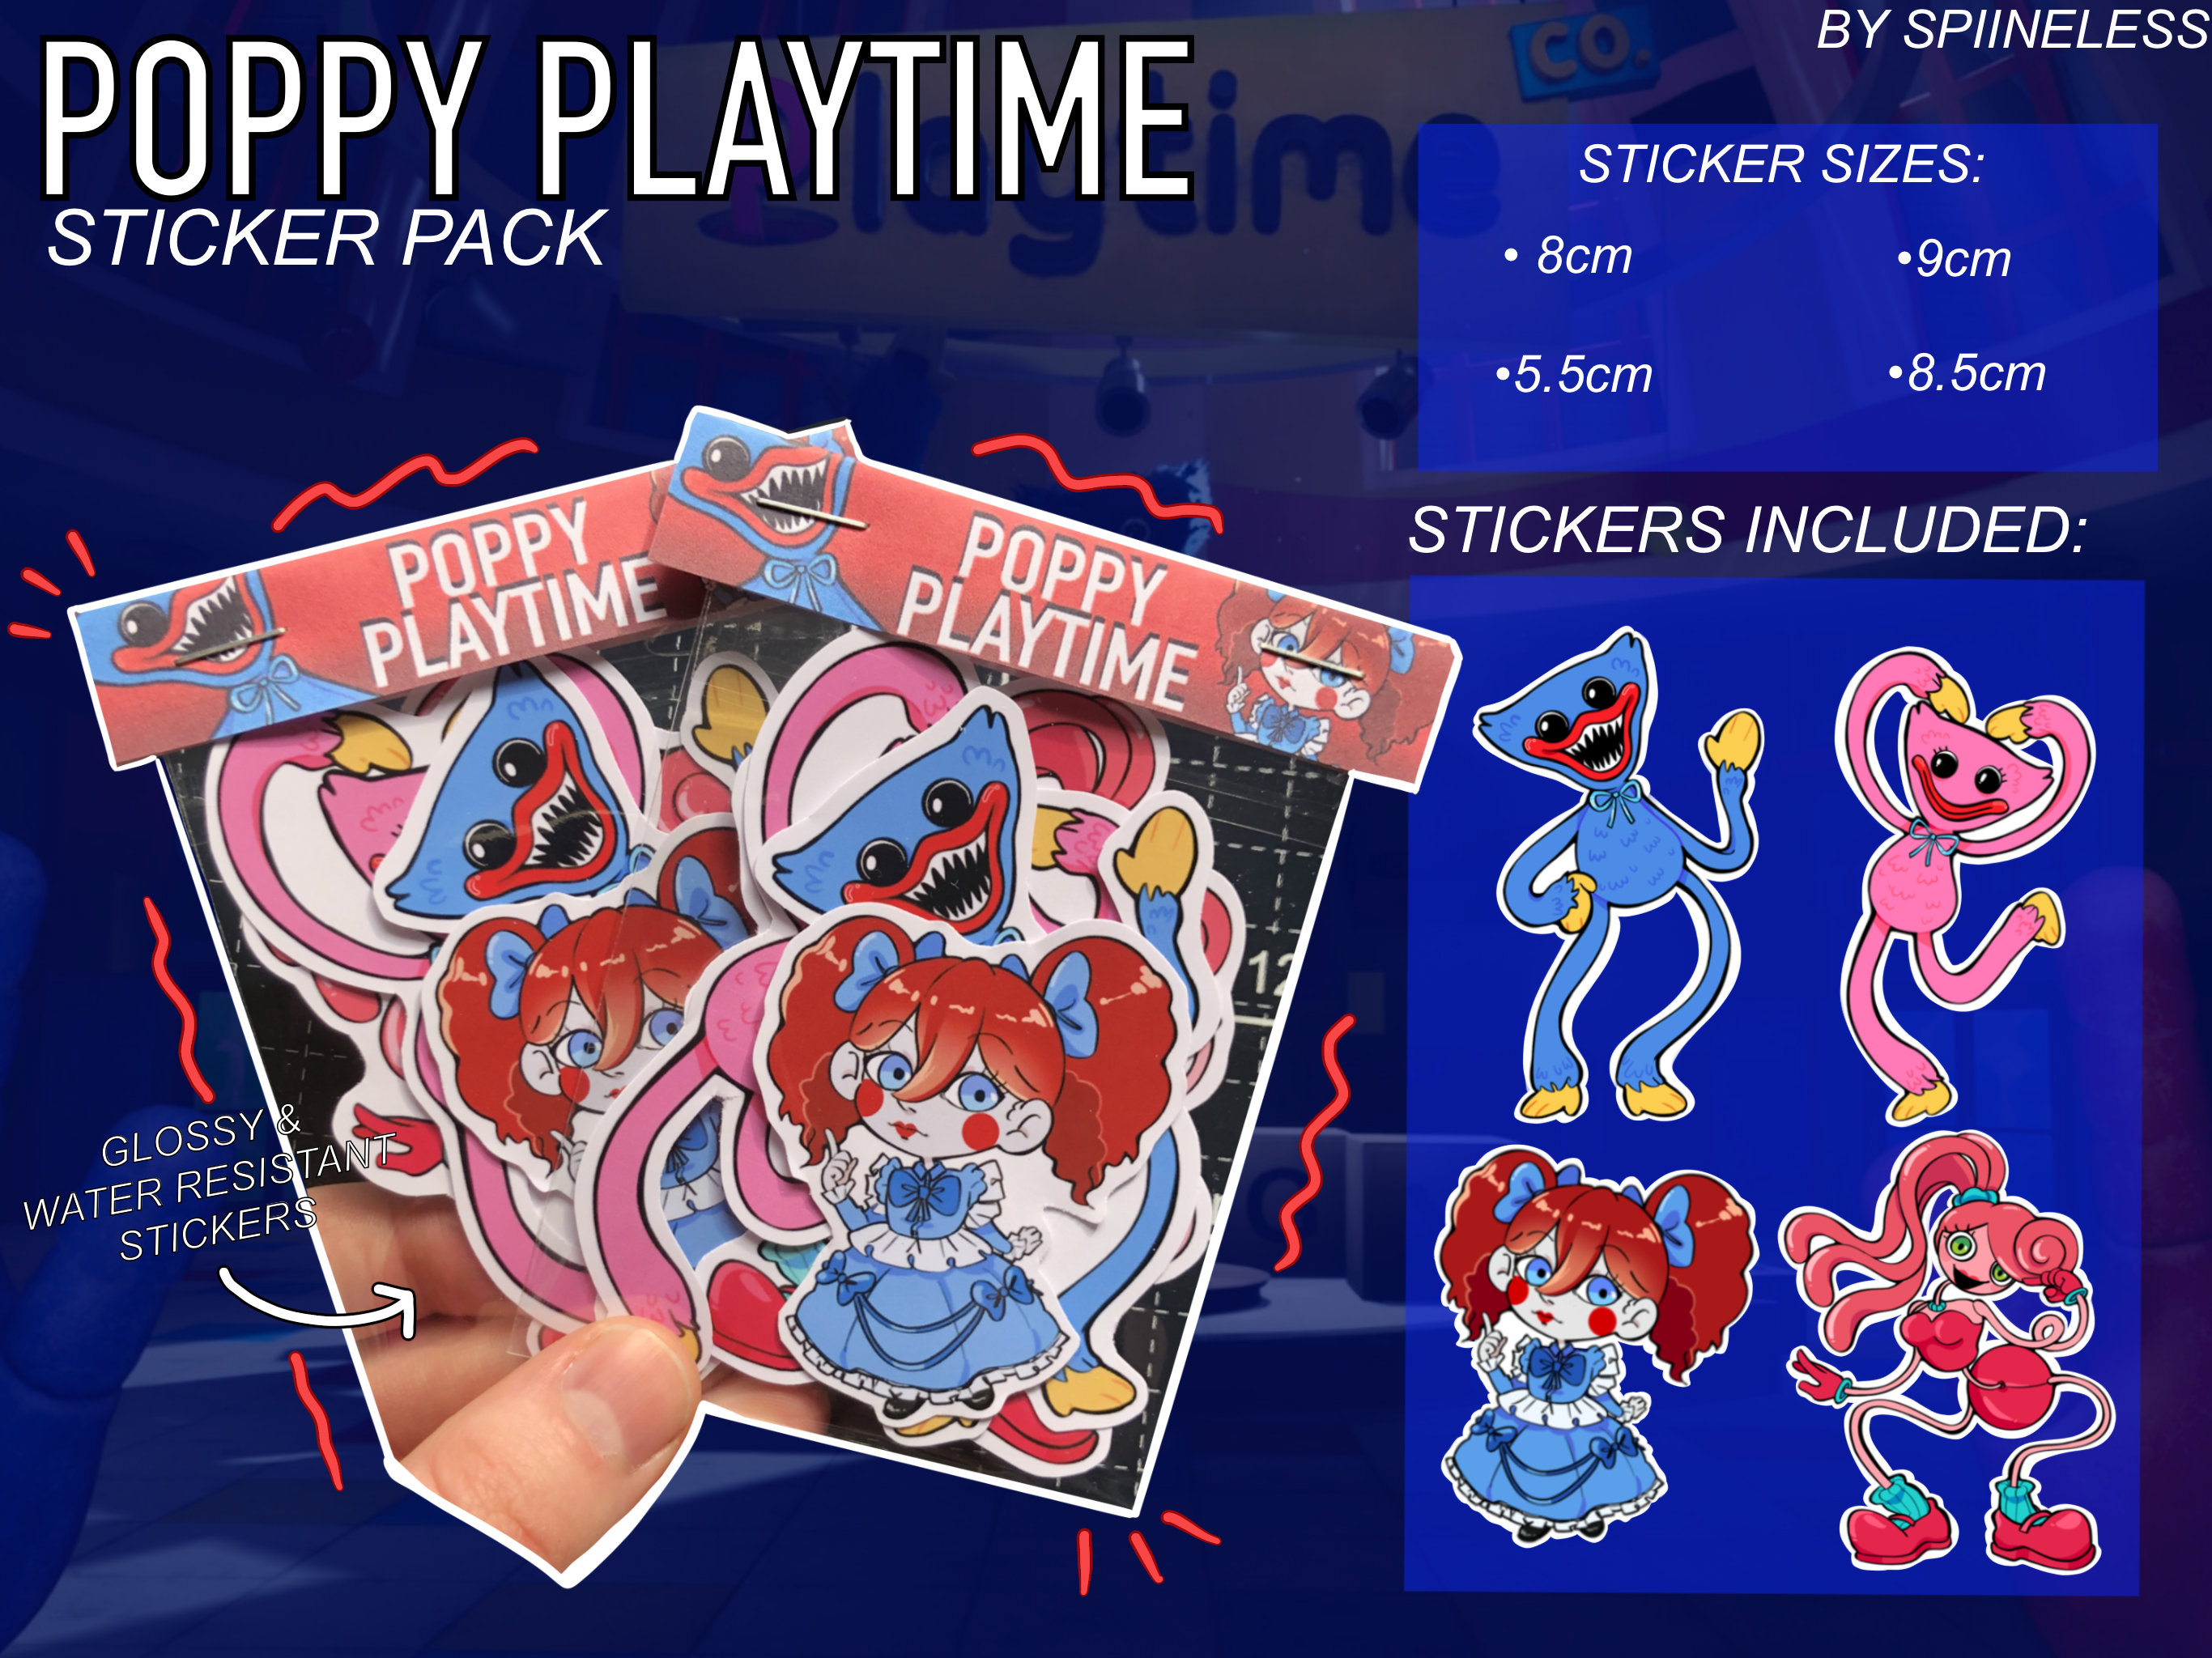 NEW GRAB PACK 2.0 FROM POPPY PLAYTIME CHAPTER 2 (MOST POWERFUL!) 